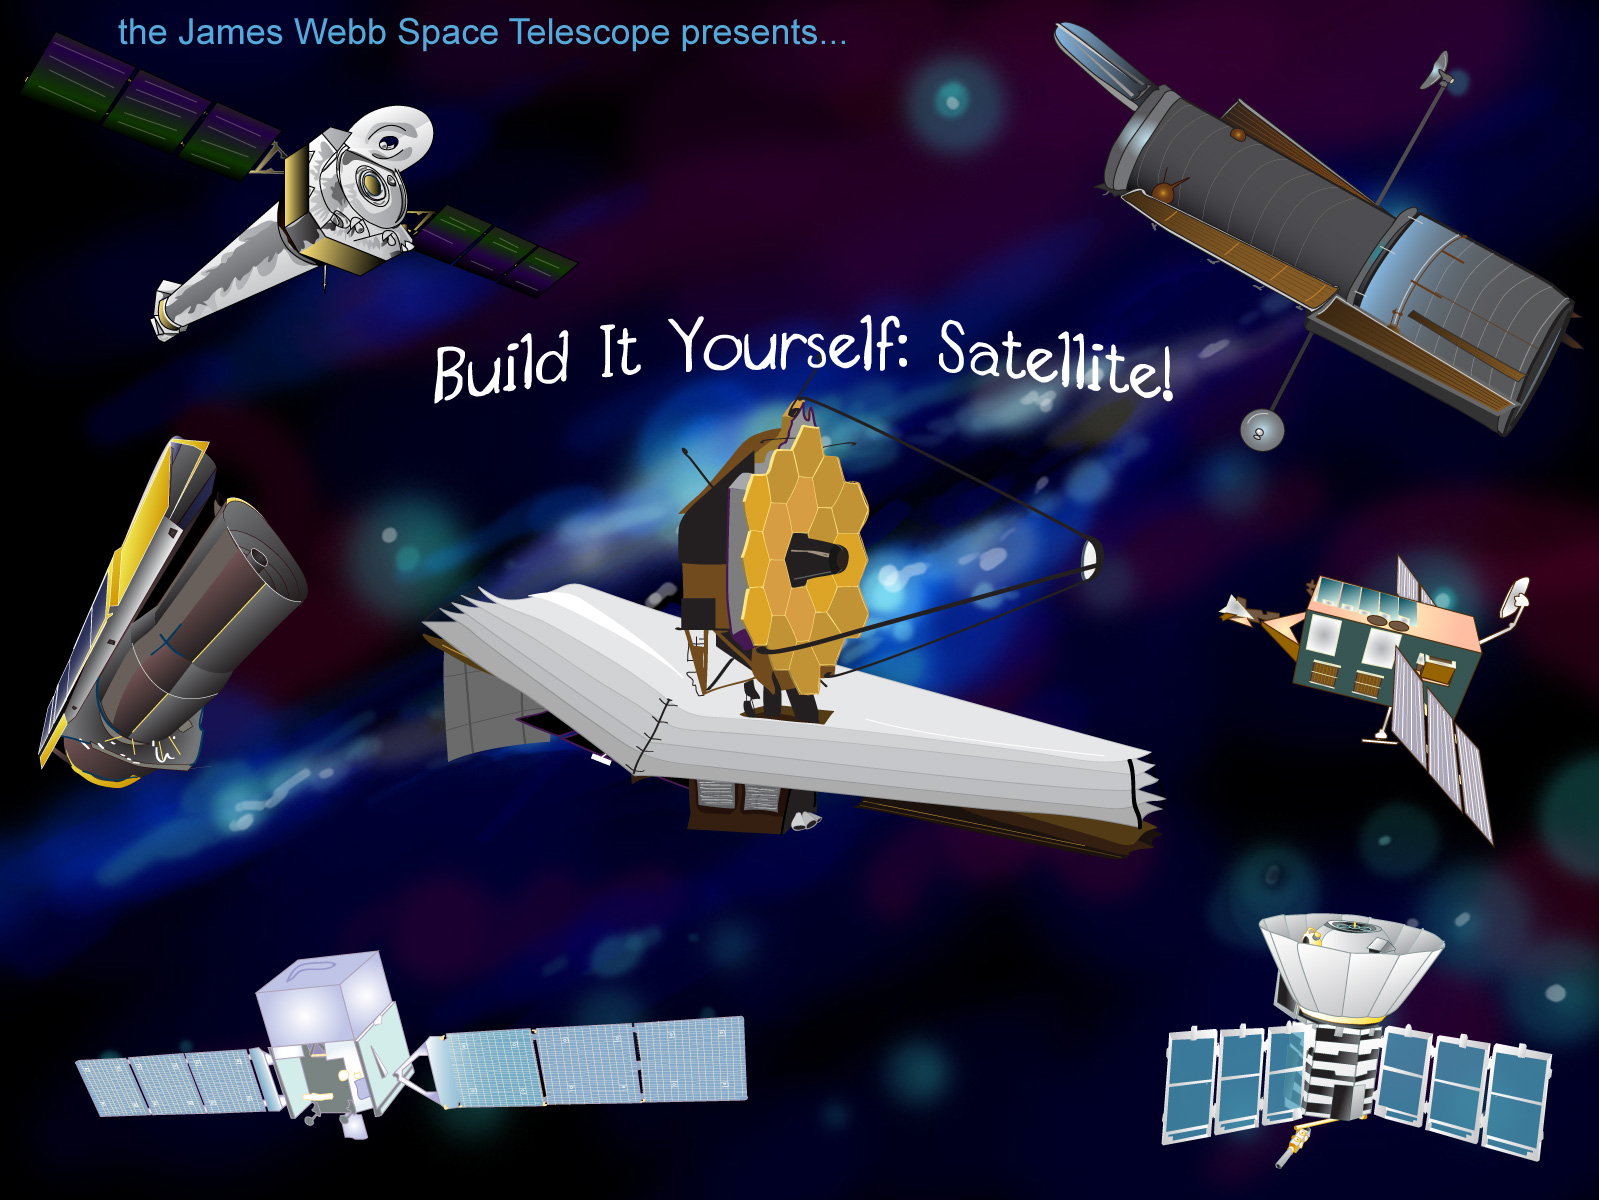 Cover art for the "Build It Yourself: Satellite" game for the Webb Telescope mission. Art of multiple spacecraft by Susan Lin.